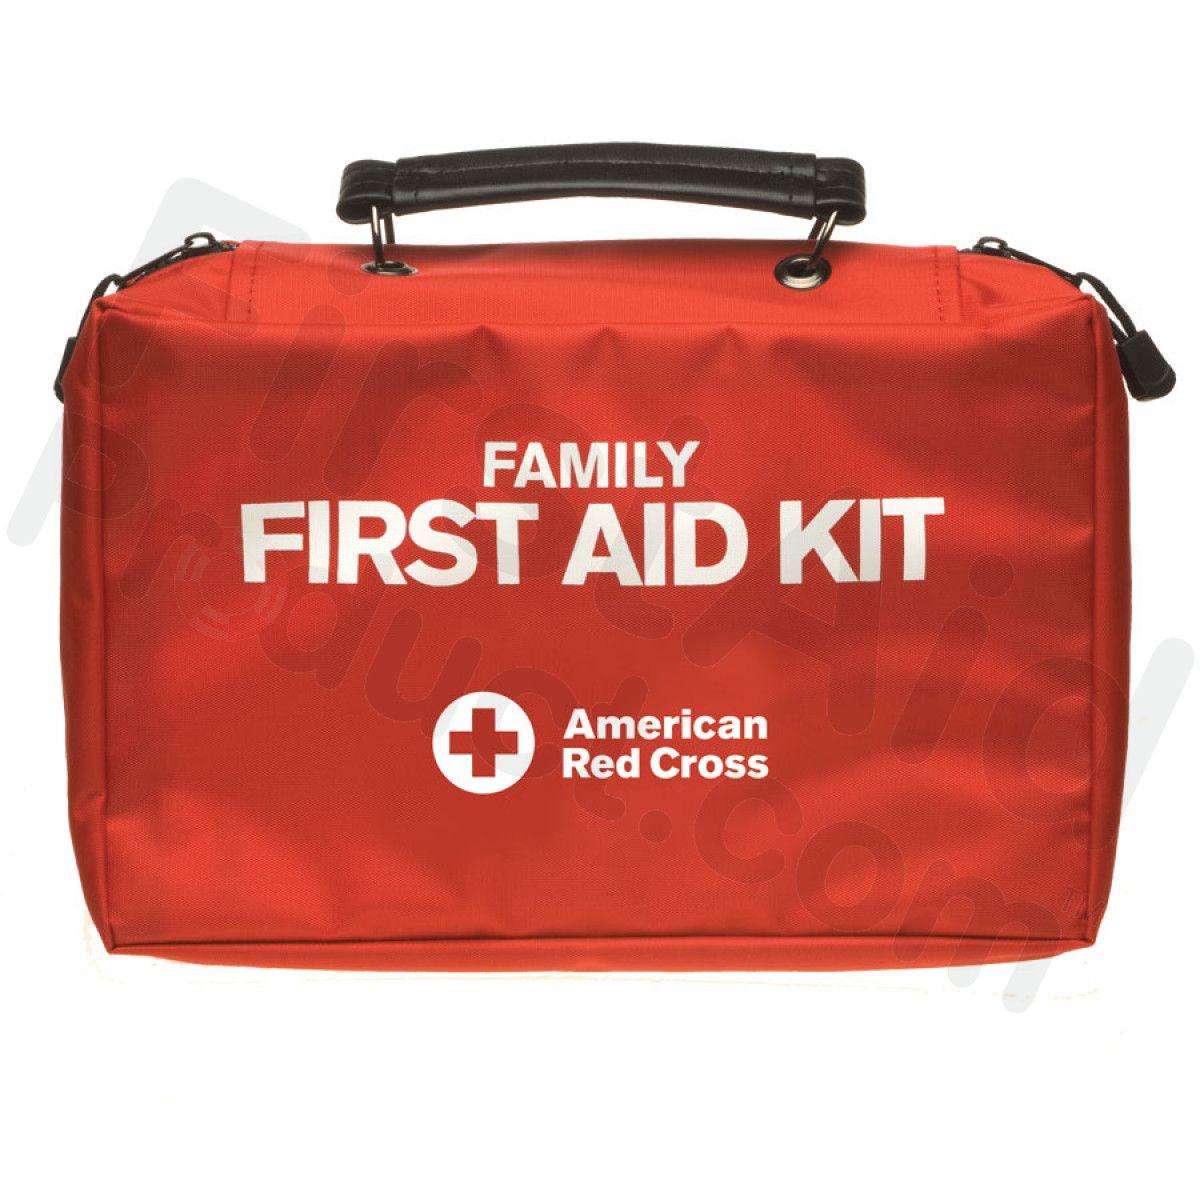 Large American Red Cross Logo - First-Aid-Product.com: American Red Cross Deluxe Family First Aid ...